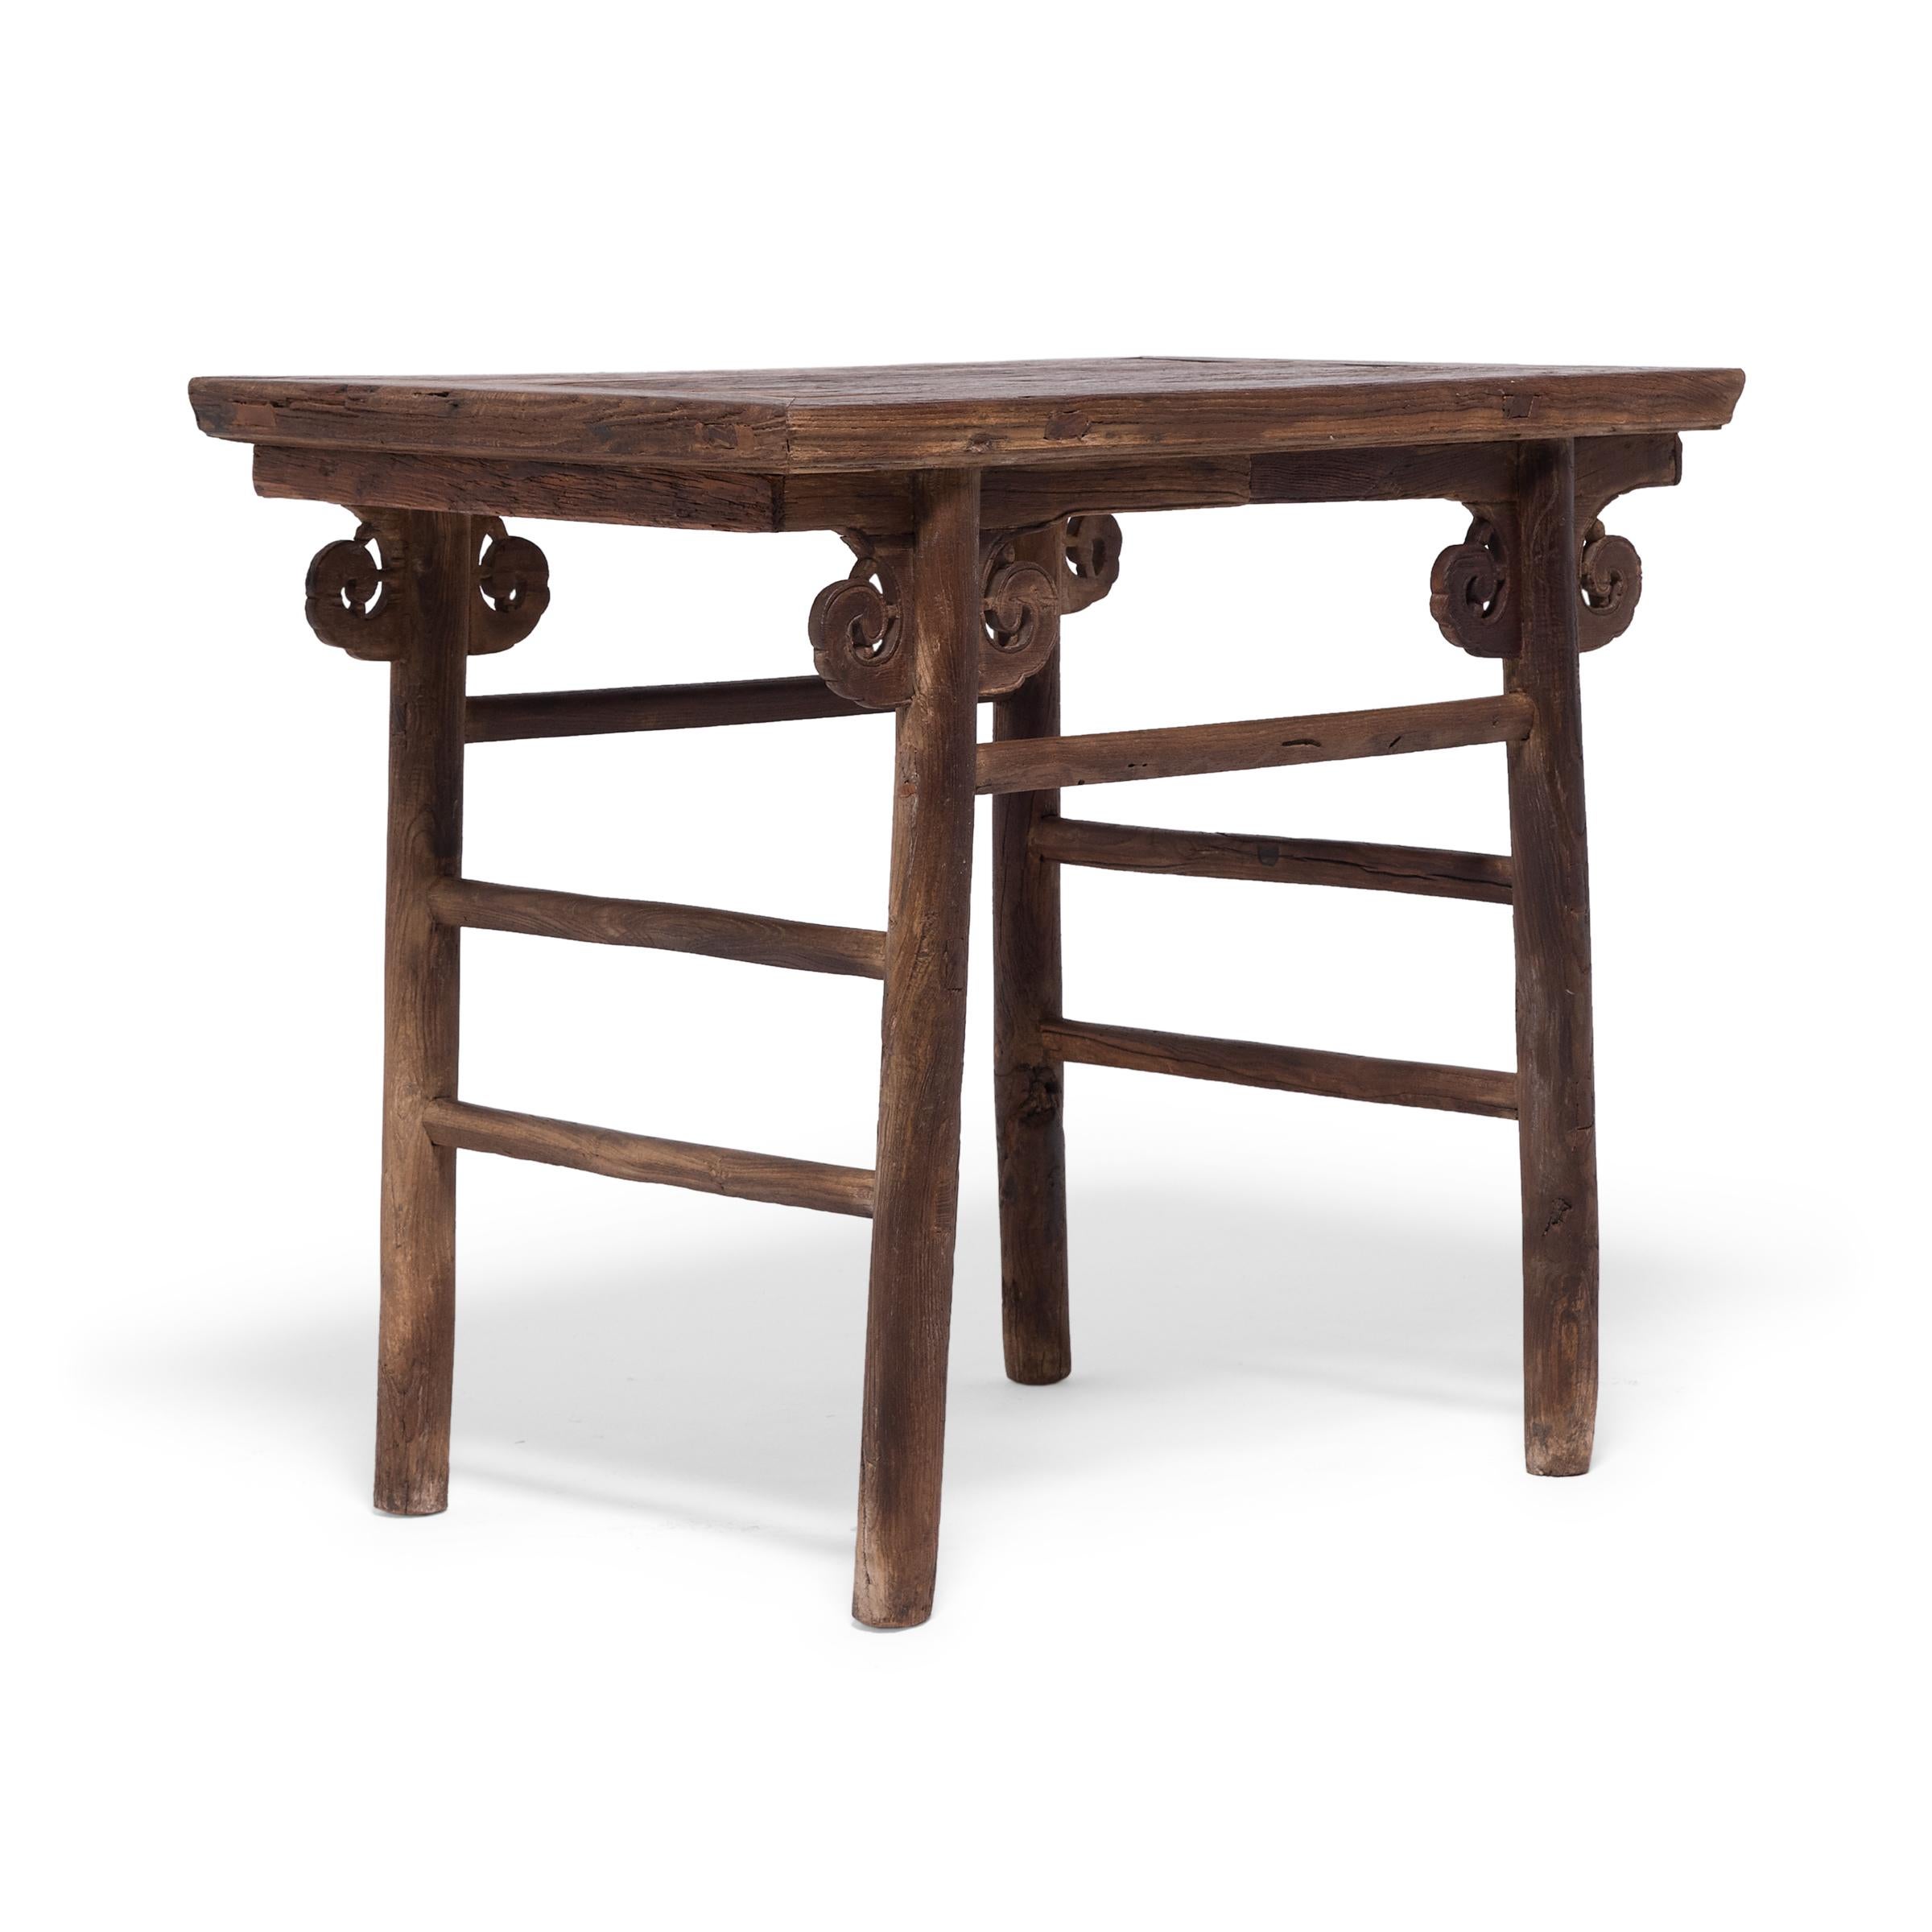 Chinese Wine Table with Cloud Spandrels, c. 1750 In Good Condition For Sale In Chicago, IL